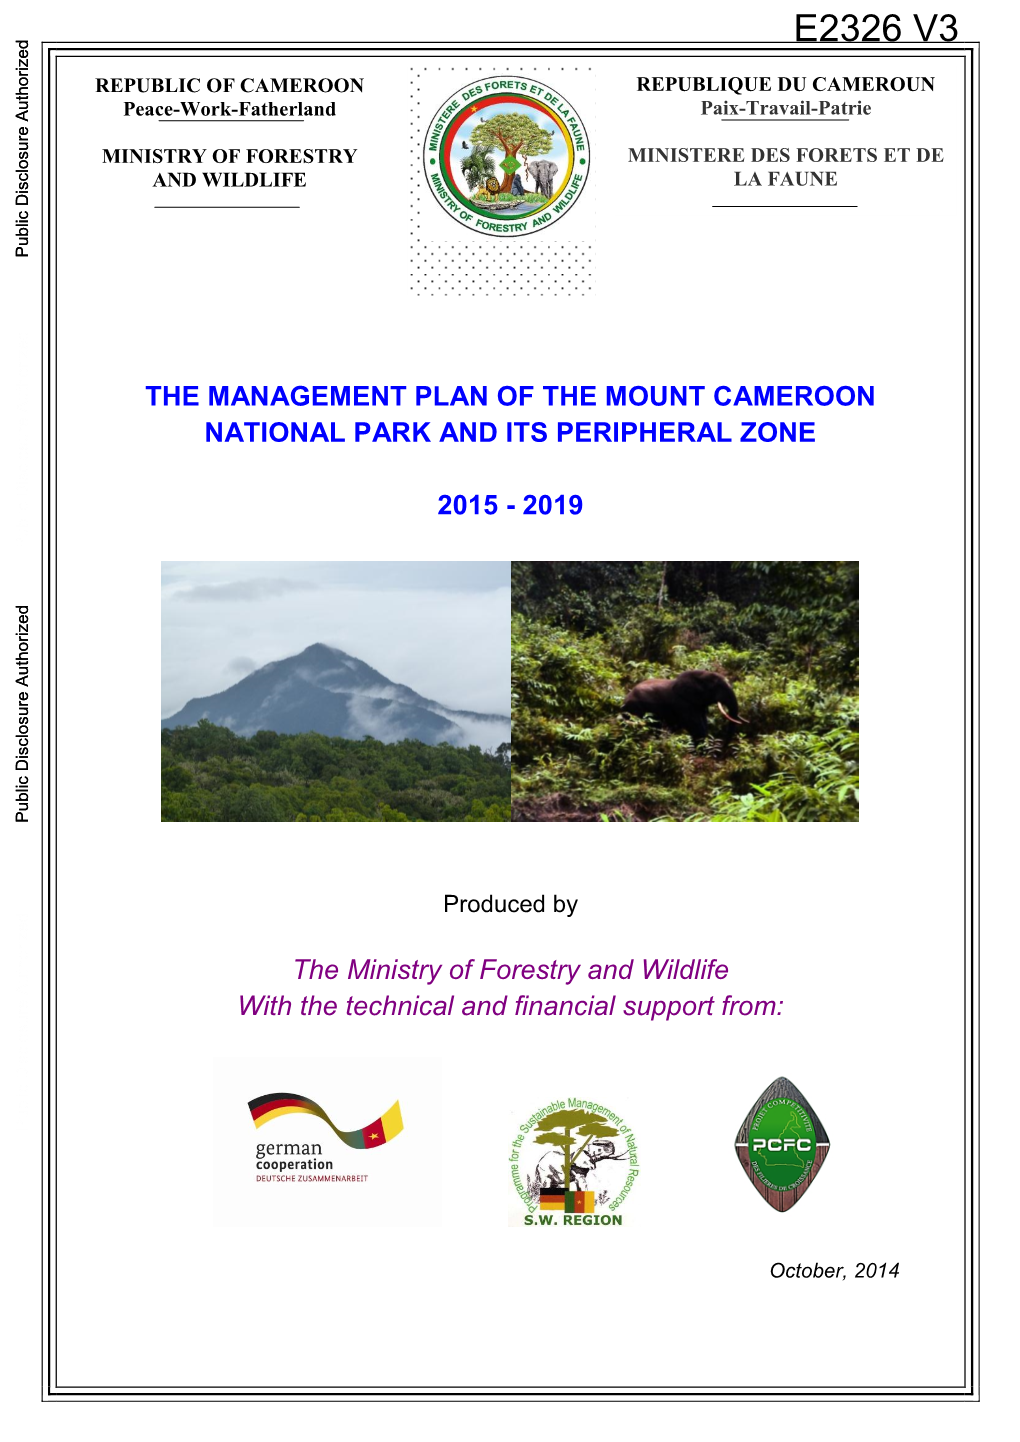 3.0 DESCRIPTION of MOUNT CAMEROON NATIONAL PARK and ITS PERIPHERAL ZONE 15 3.1 General Information